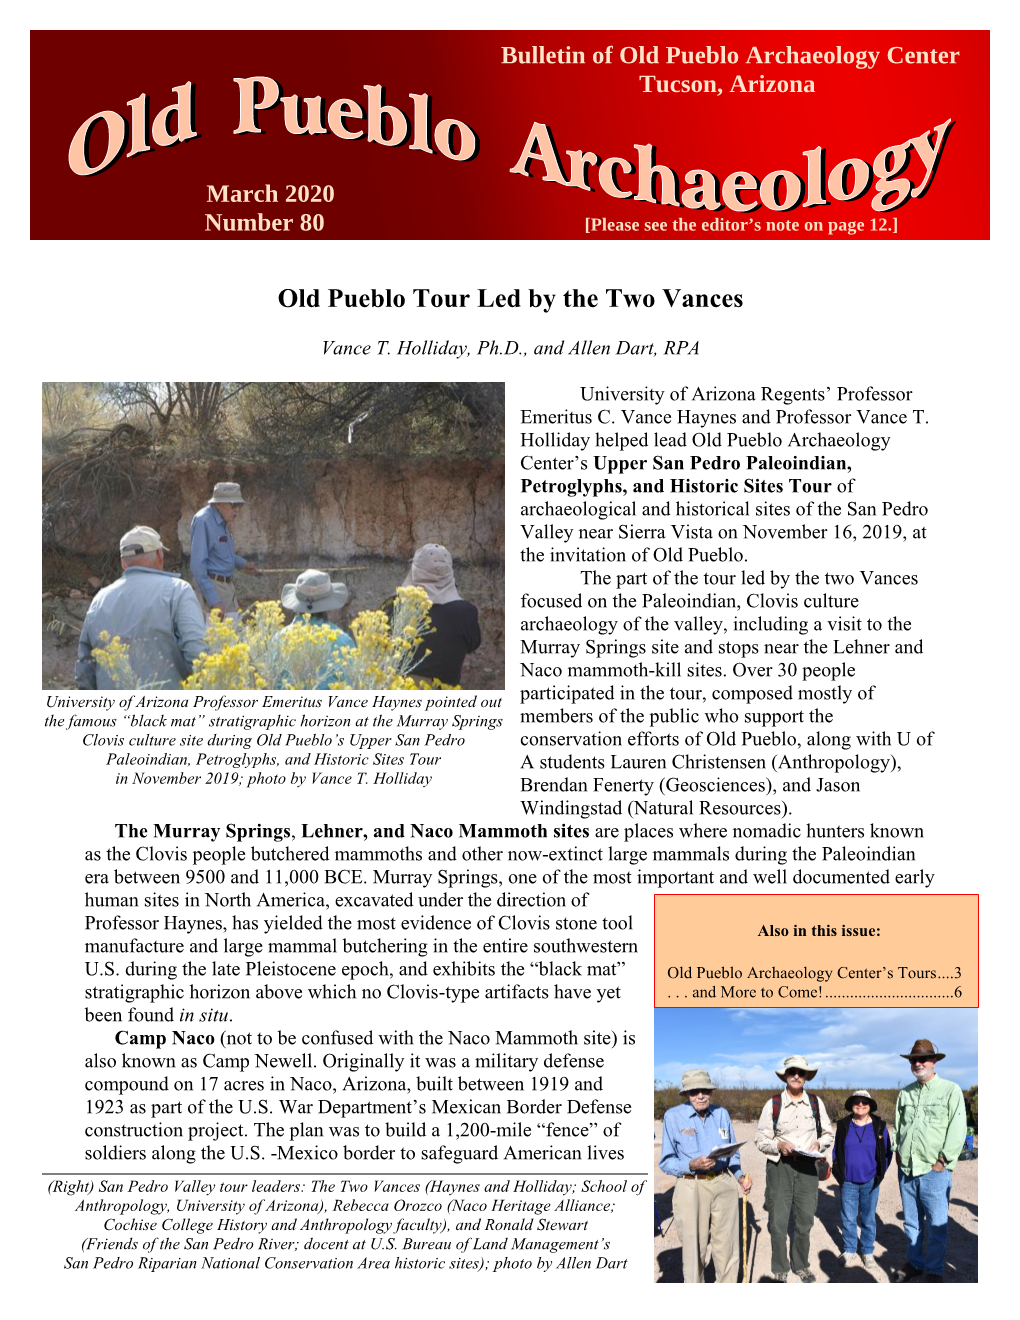 Issue 80 – March 2020 – Old Pueblo Tour Led by the Two Vances